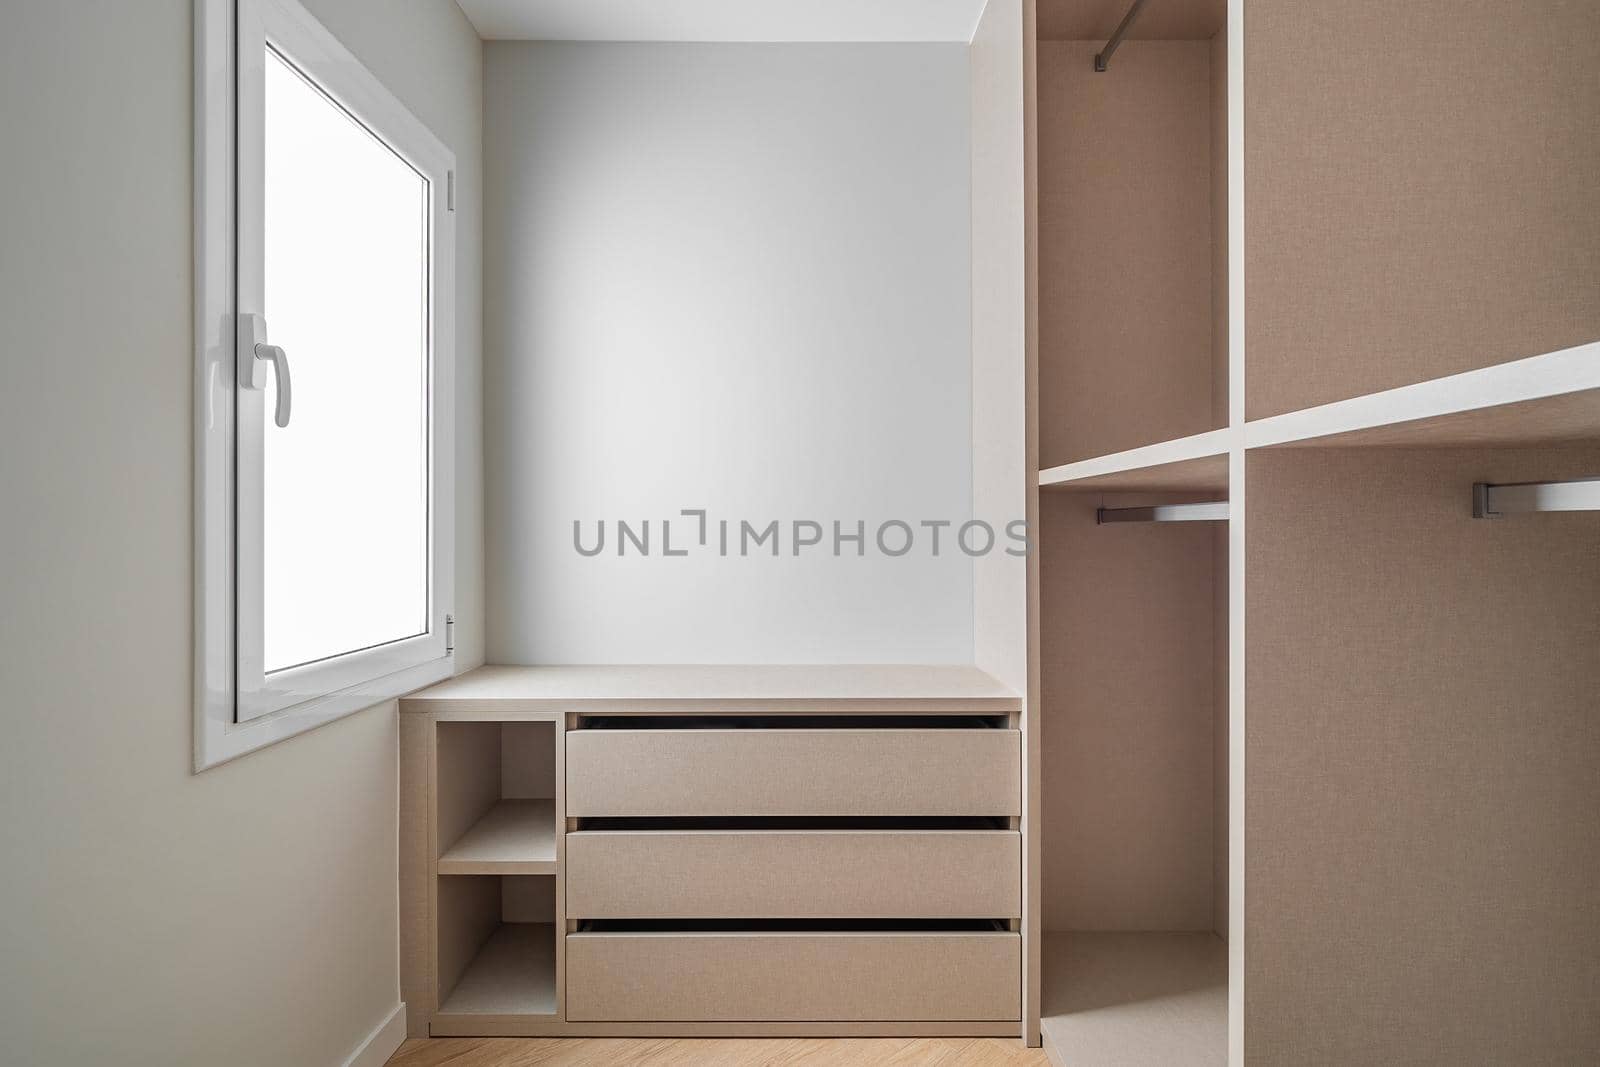 New built-in furniture in a small dressing room. Modern and empty storage room with wardrobe, drawers and plenty of space for hangers